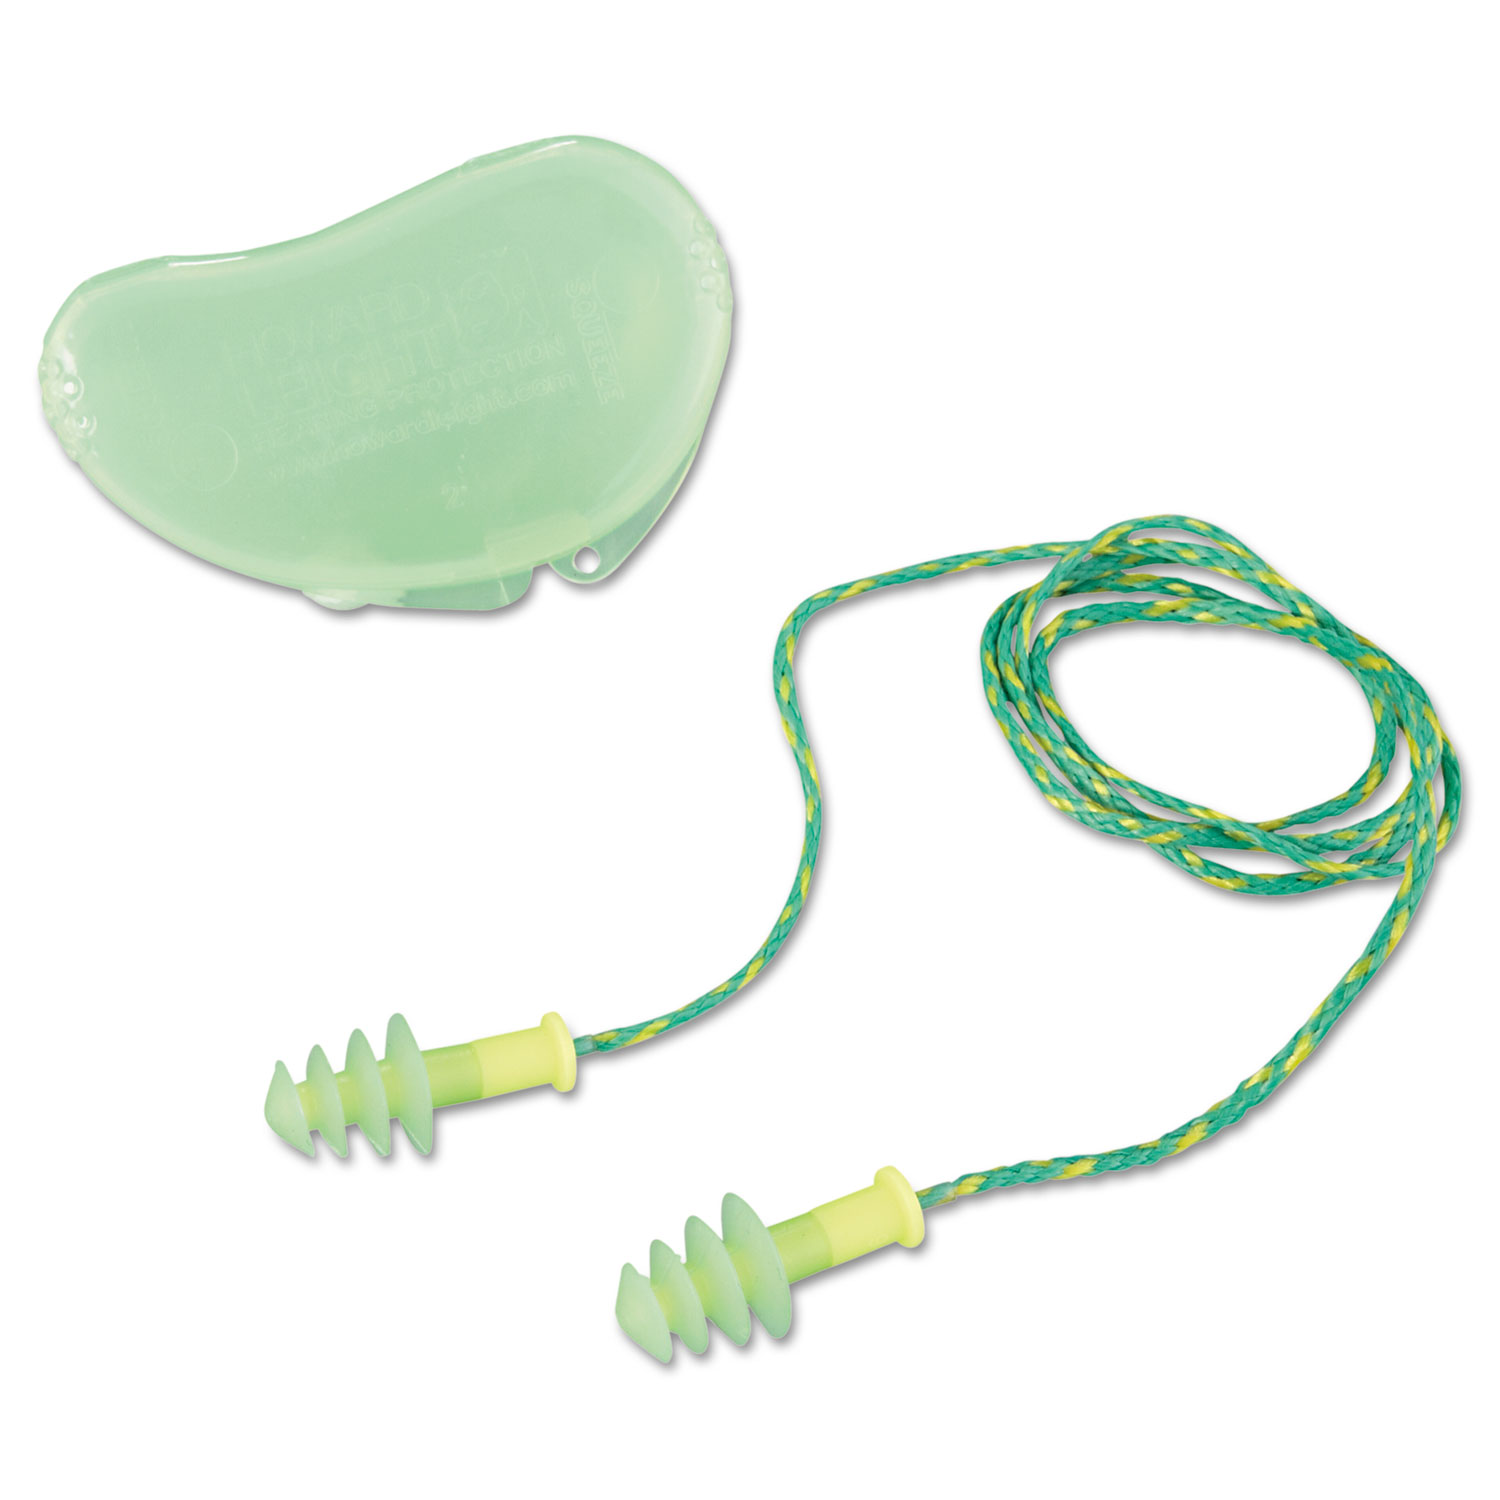  Howard Leight by Honeywell FUS30S-HP FUS30S-HP Fusion Multiple-Use Earplugs, Small, 27NRR, Corded, GN/WE, 100 Pairs (HOWFUS30SHP) 